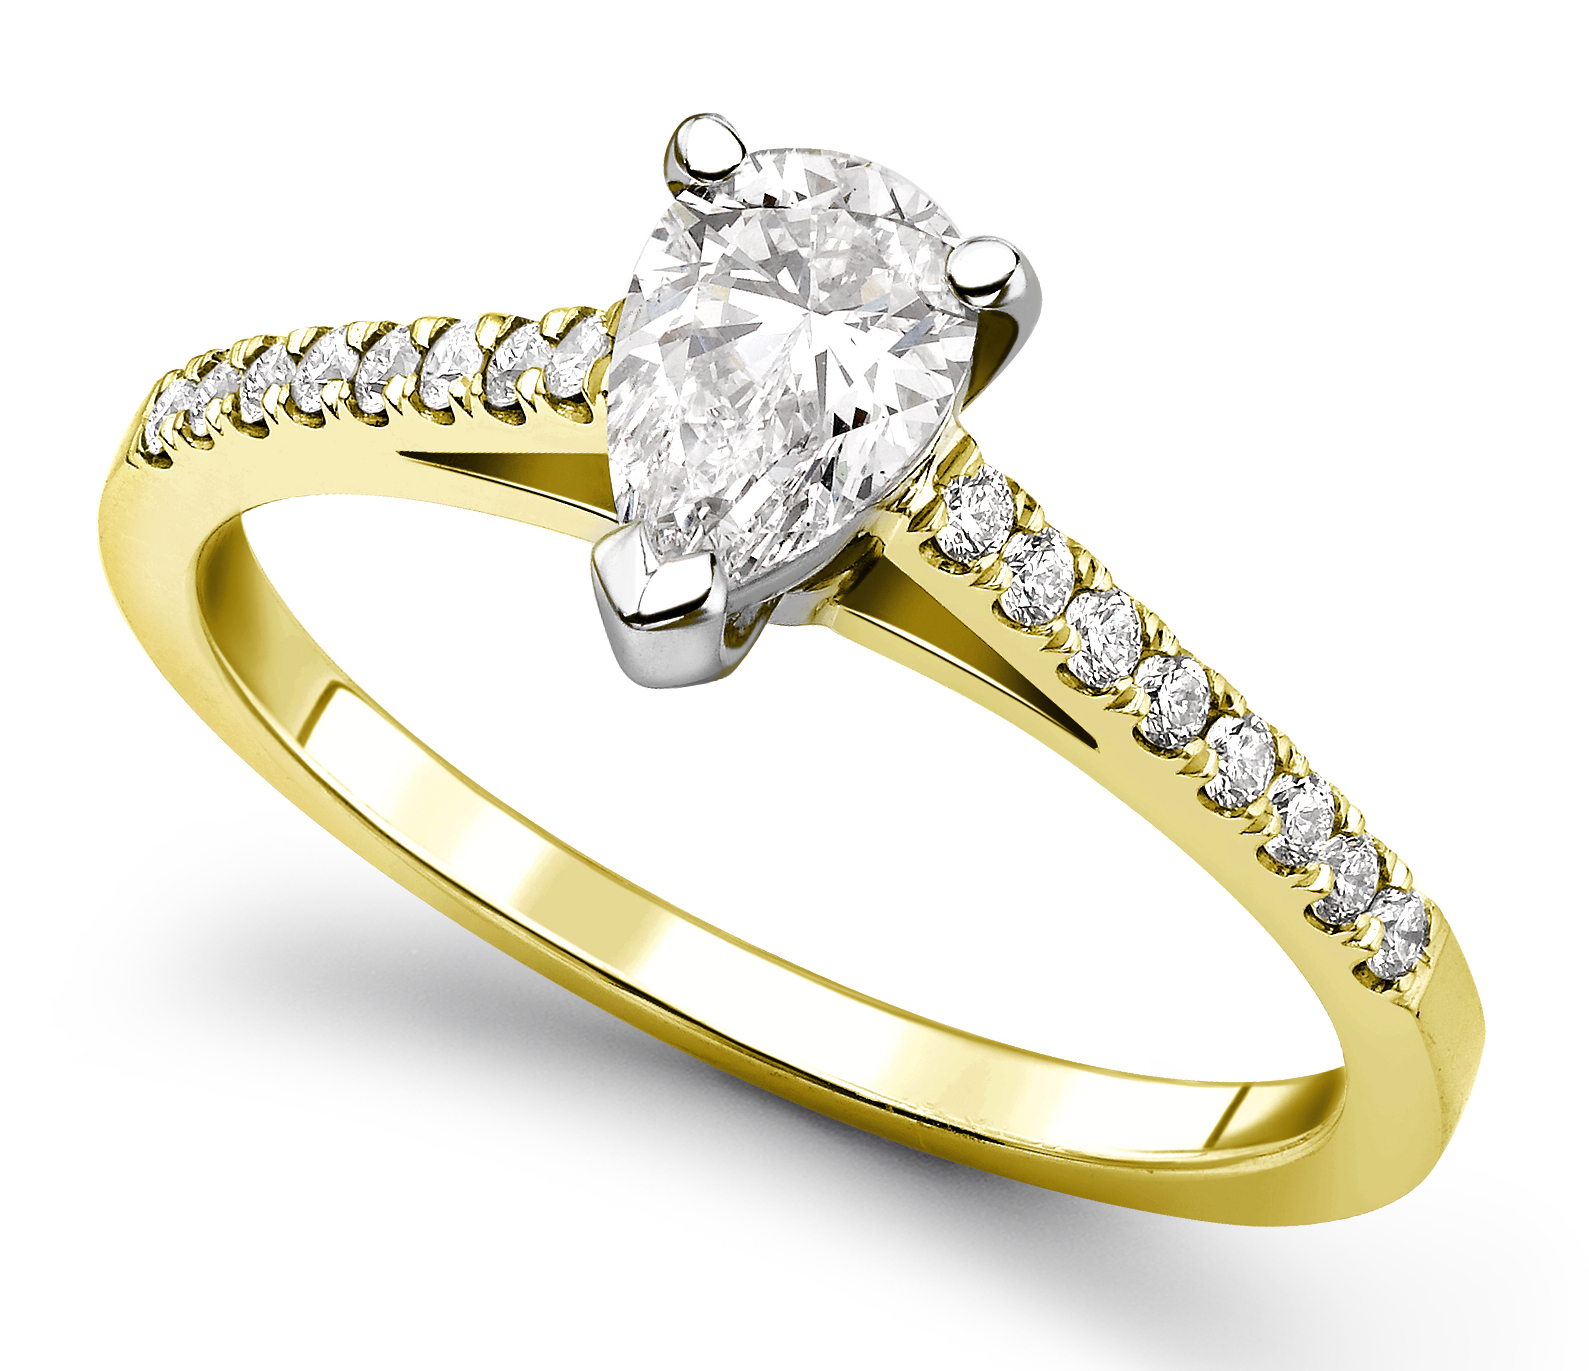 Pear Shape 3 Claw Yellow Gold Diamond Engagement Ring CRC698YG Main Image